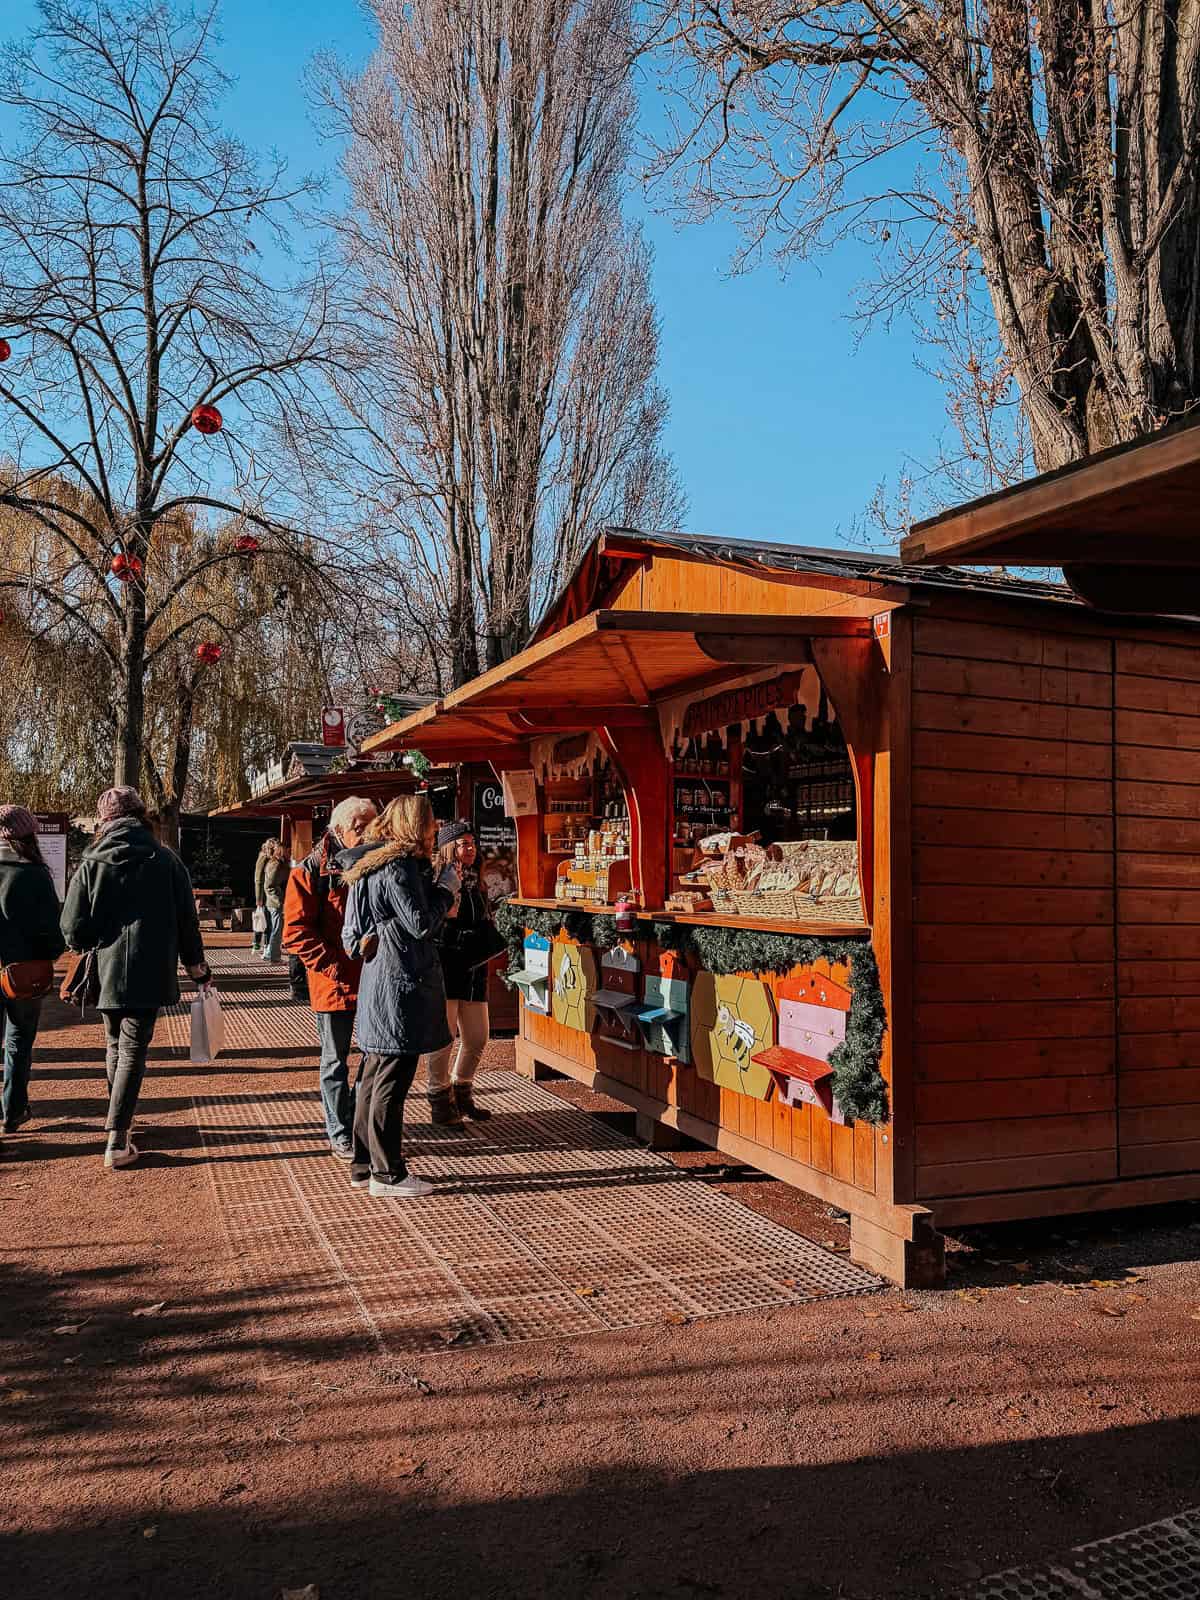 A sunny day at a Christmas market with shoppers walking past wooden stalls selling traditional goods under tall, leafless trees